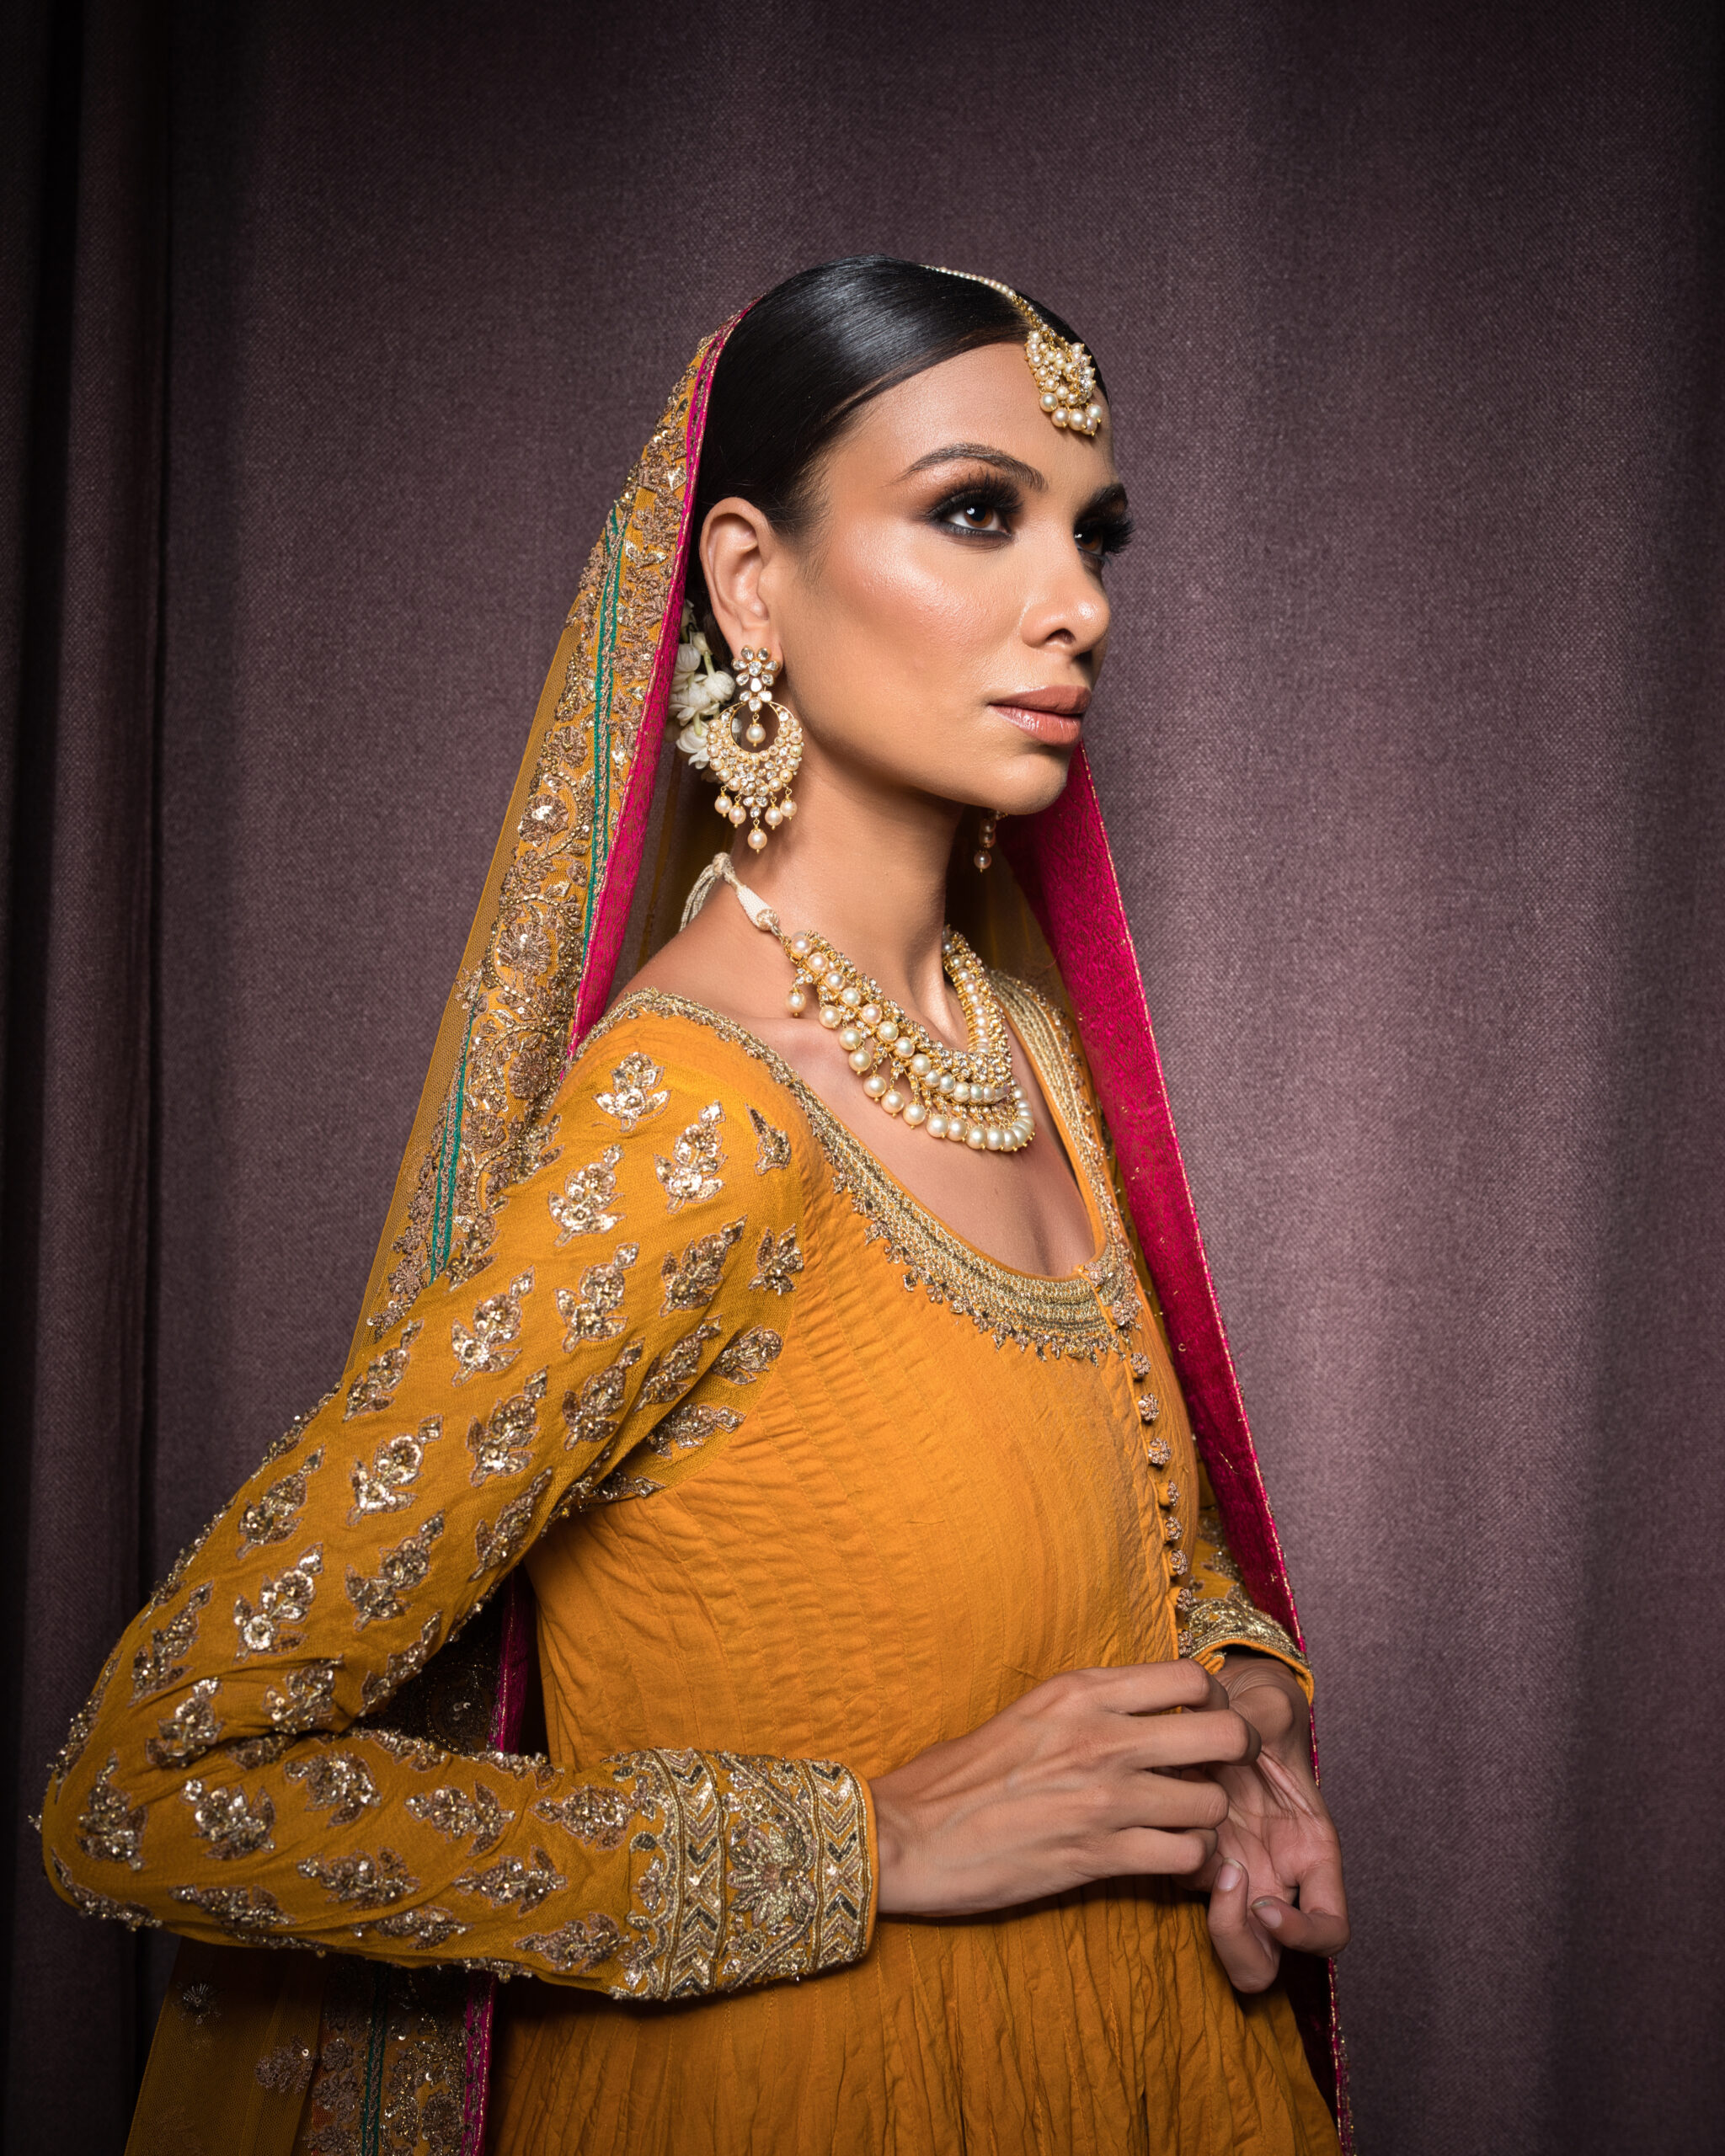 Diverse bridal makeup portfolio featuring looks for various skin tones and cultural backgrounds.